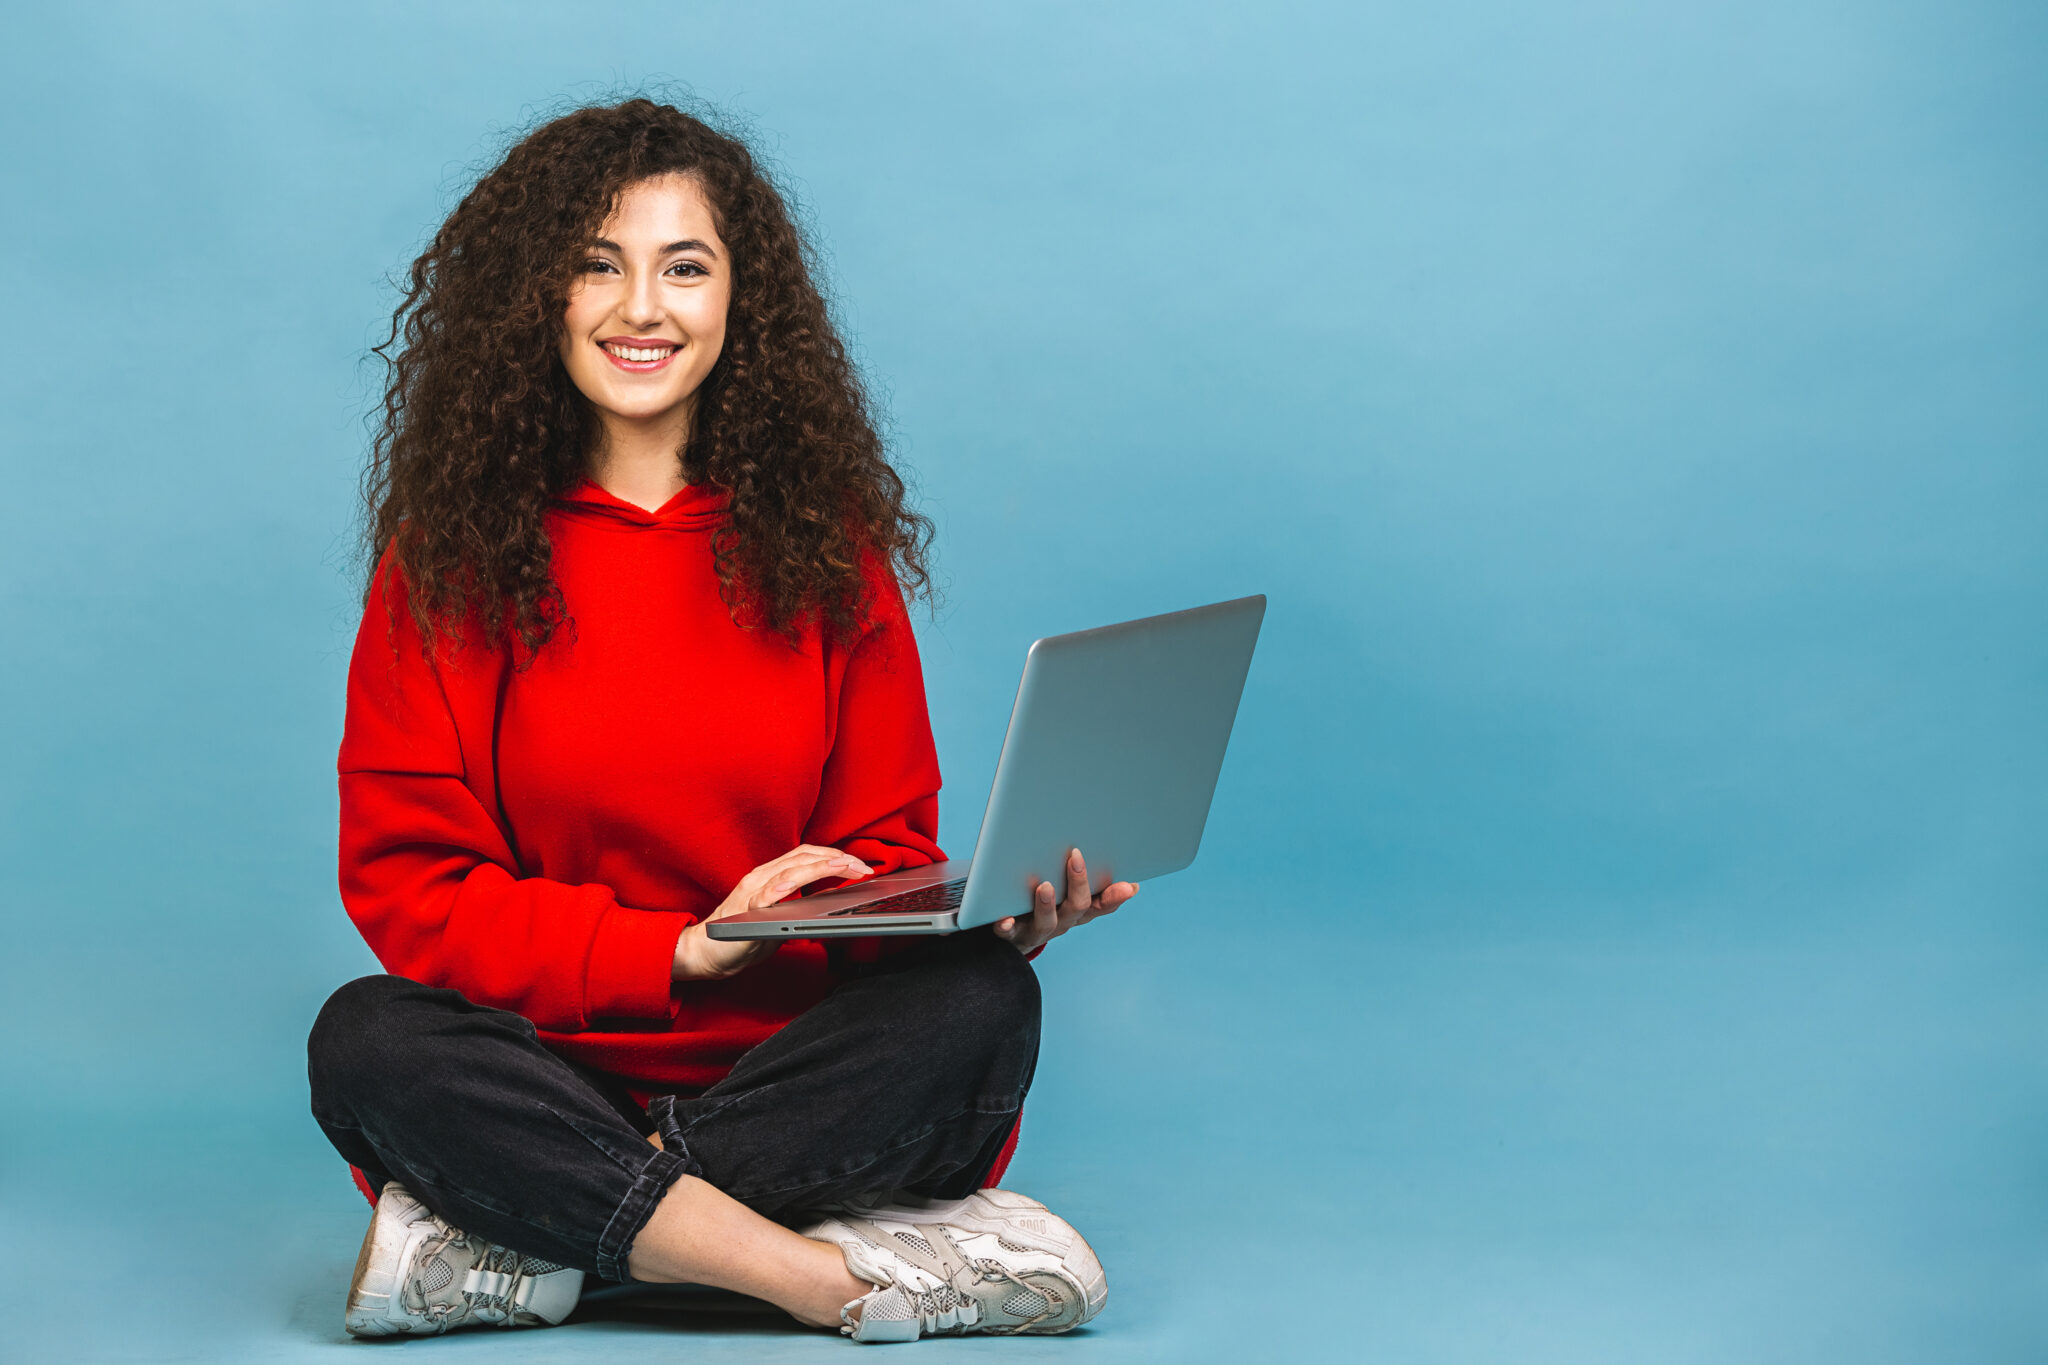 Curly beautiful woman sitting on the floor with laptop